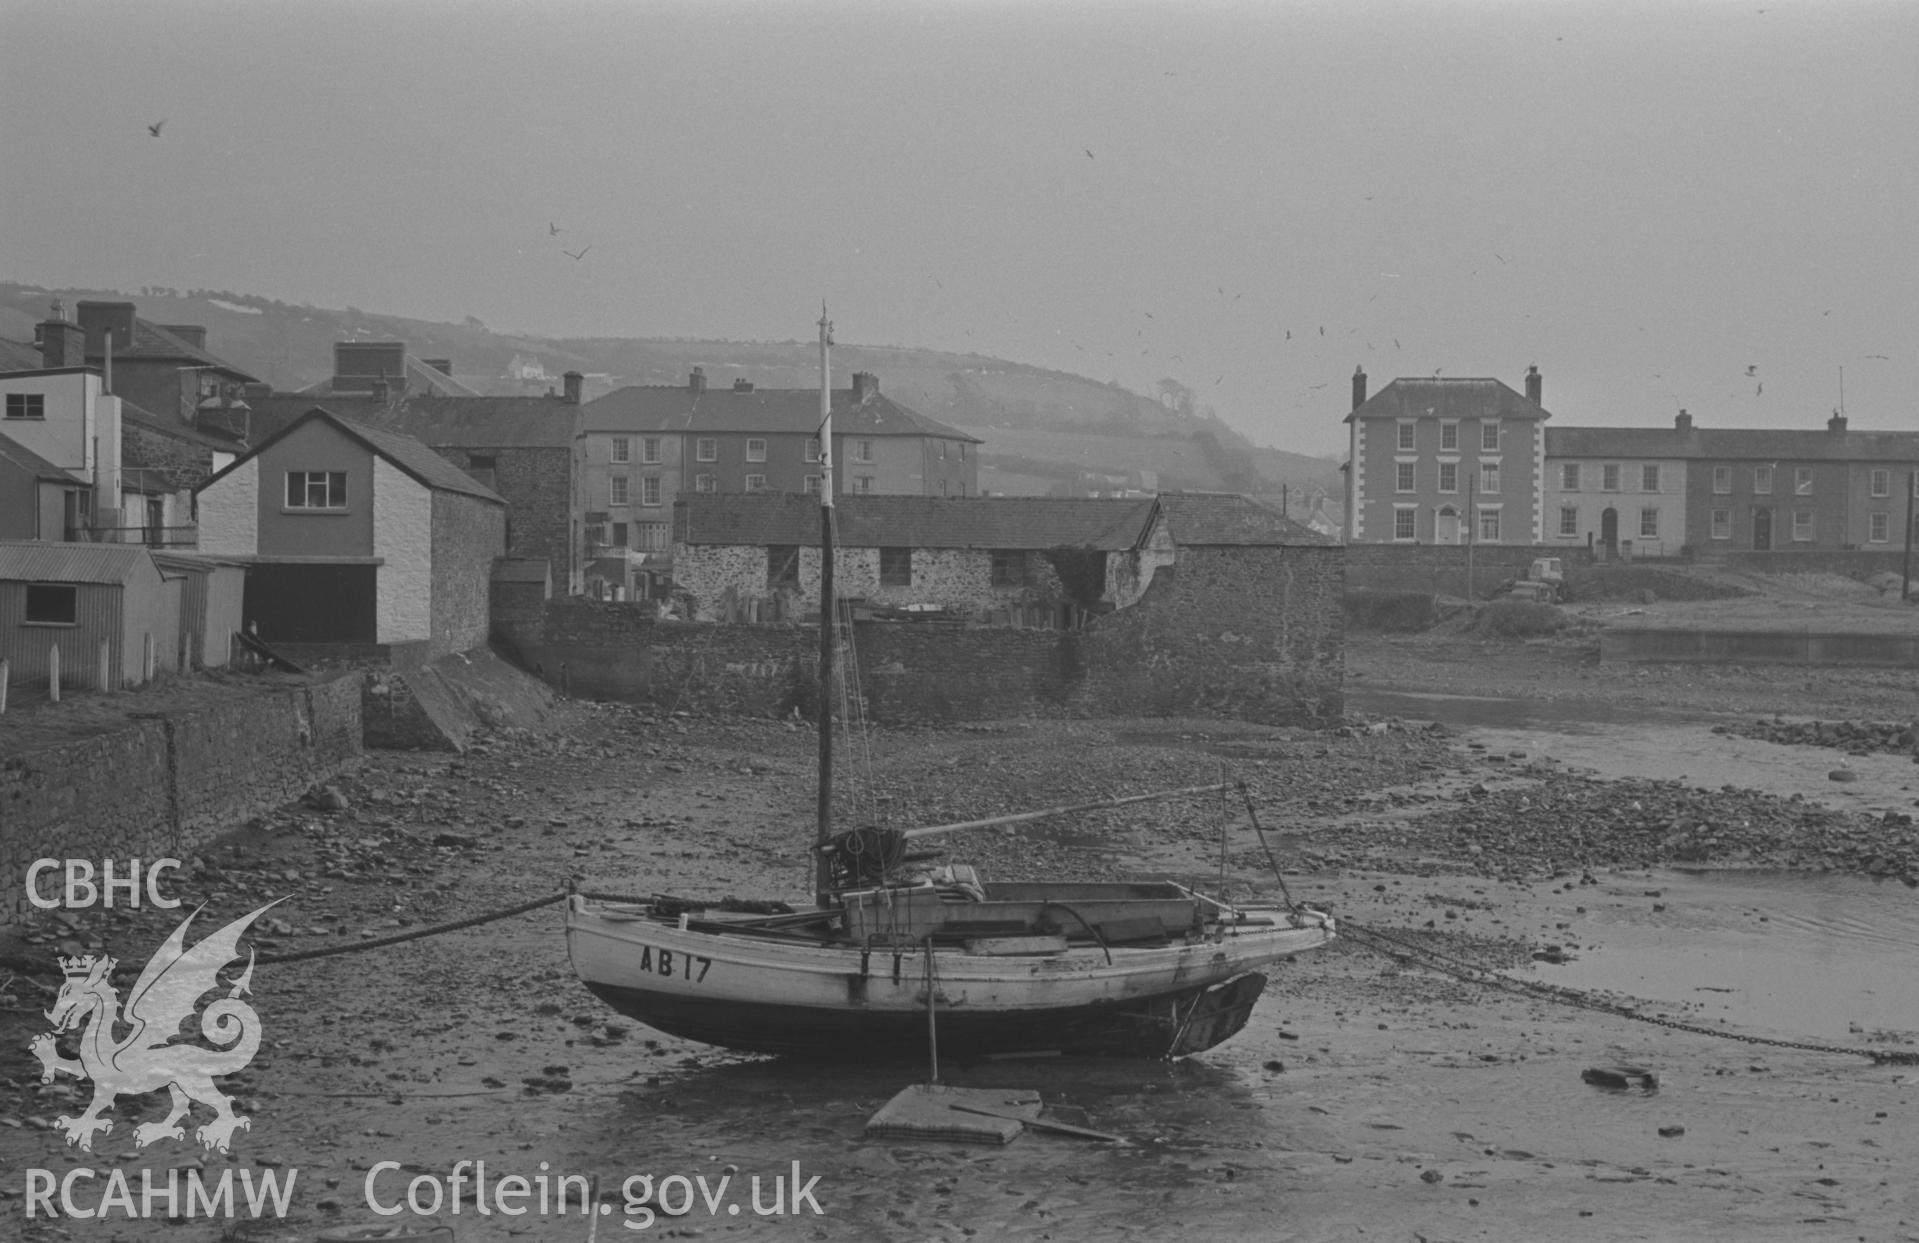 Black and White photograph showing view across Aberaeron Harbour from Cadwgan Place. Photographed by Arthut Chater in February 1963, from Grid Reference SN 4570 6293, looking south east.